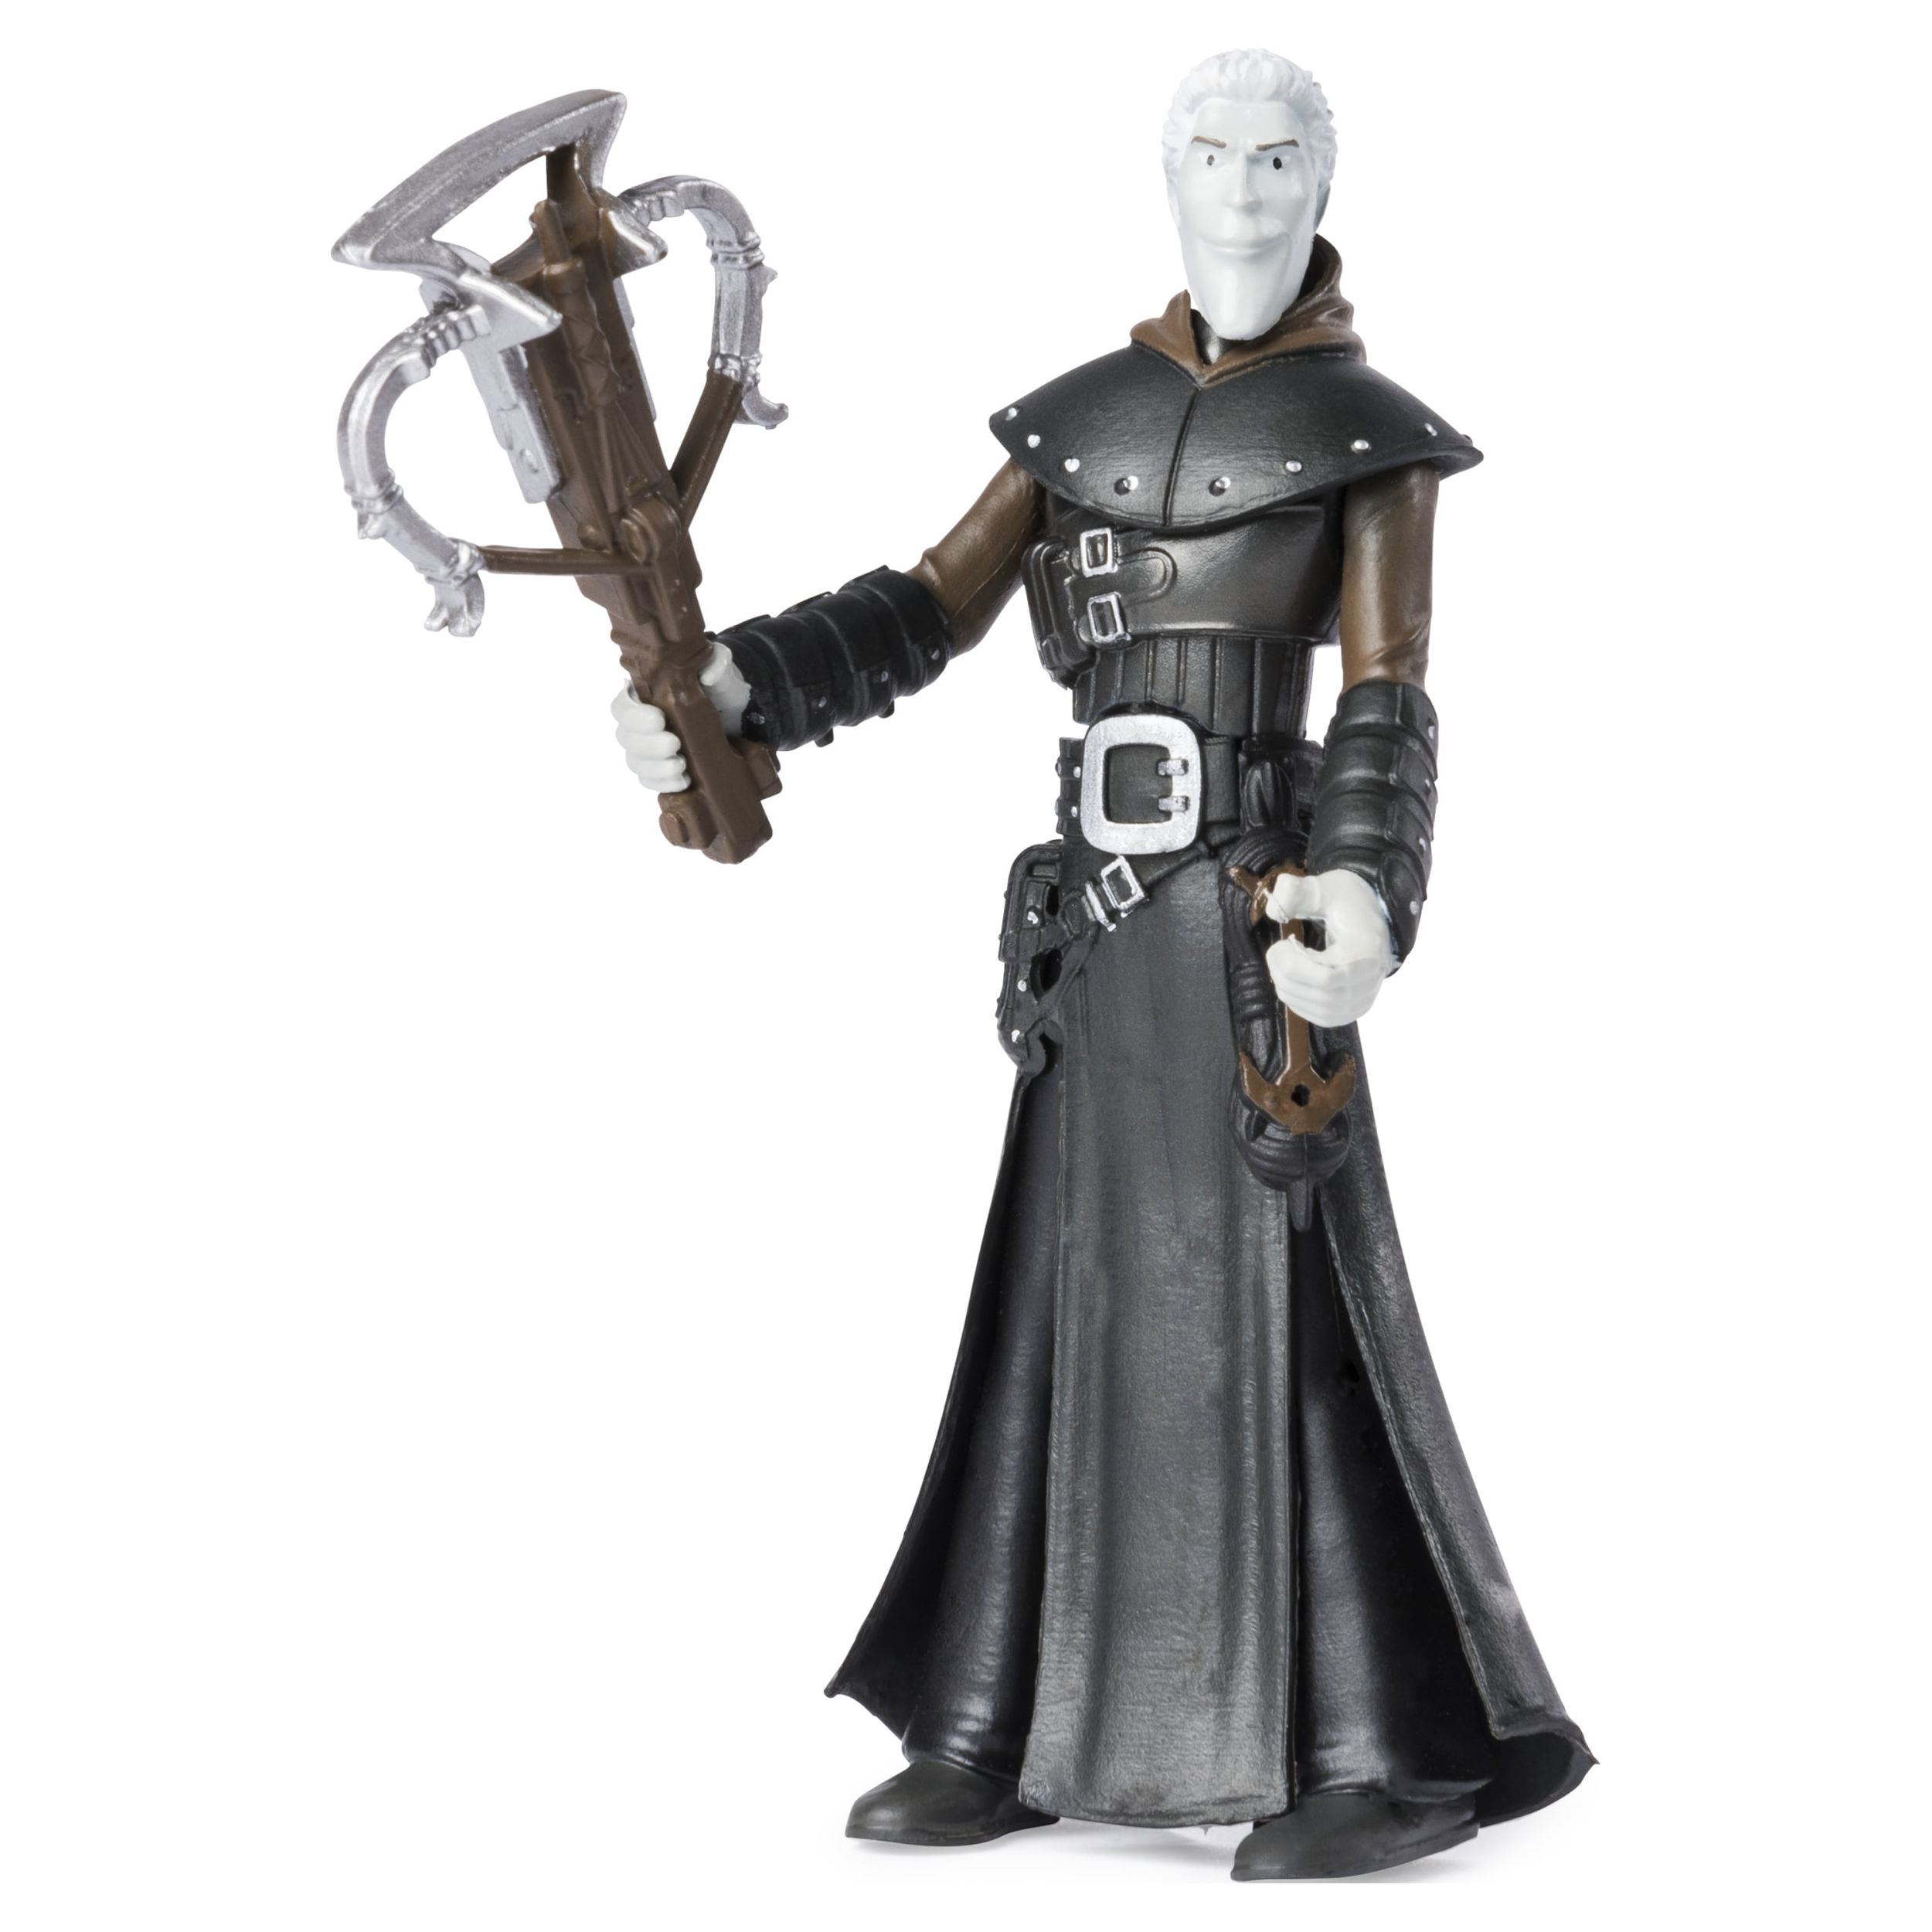 DreamWorks Dragons, Deathgripper and Grimmel, Dragon with Armored Viking Figure, for Kids Aged 4 and Up - image 4 of 6